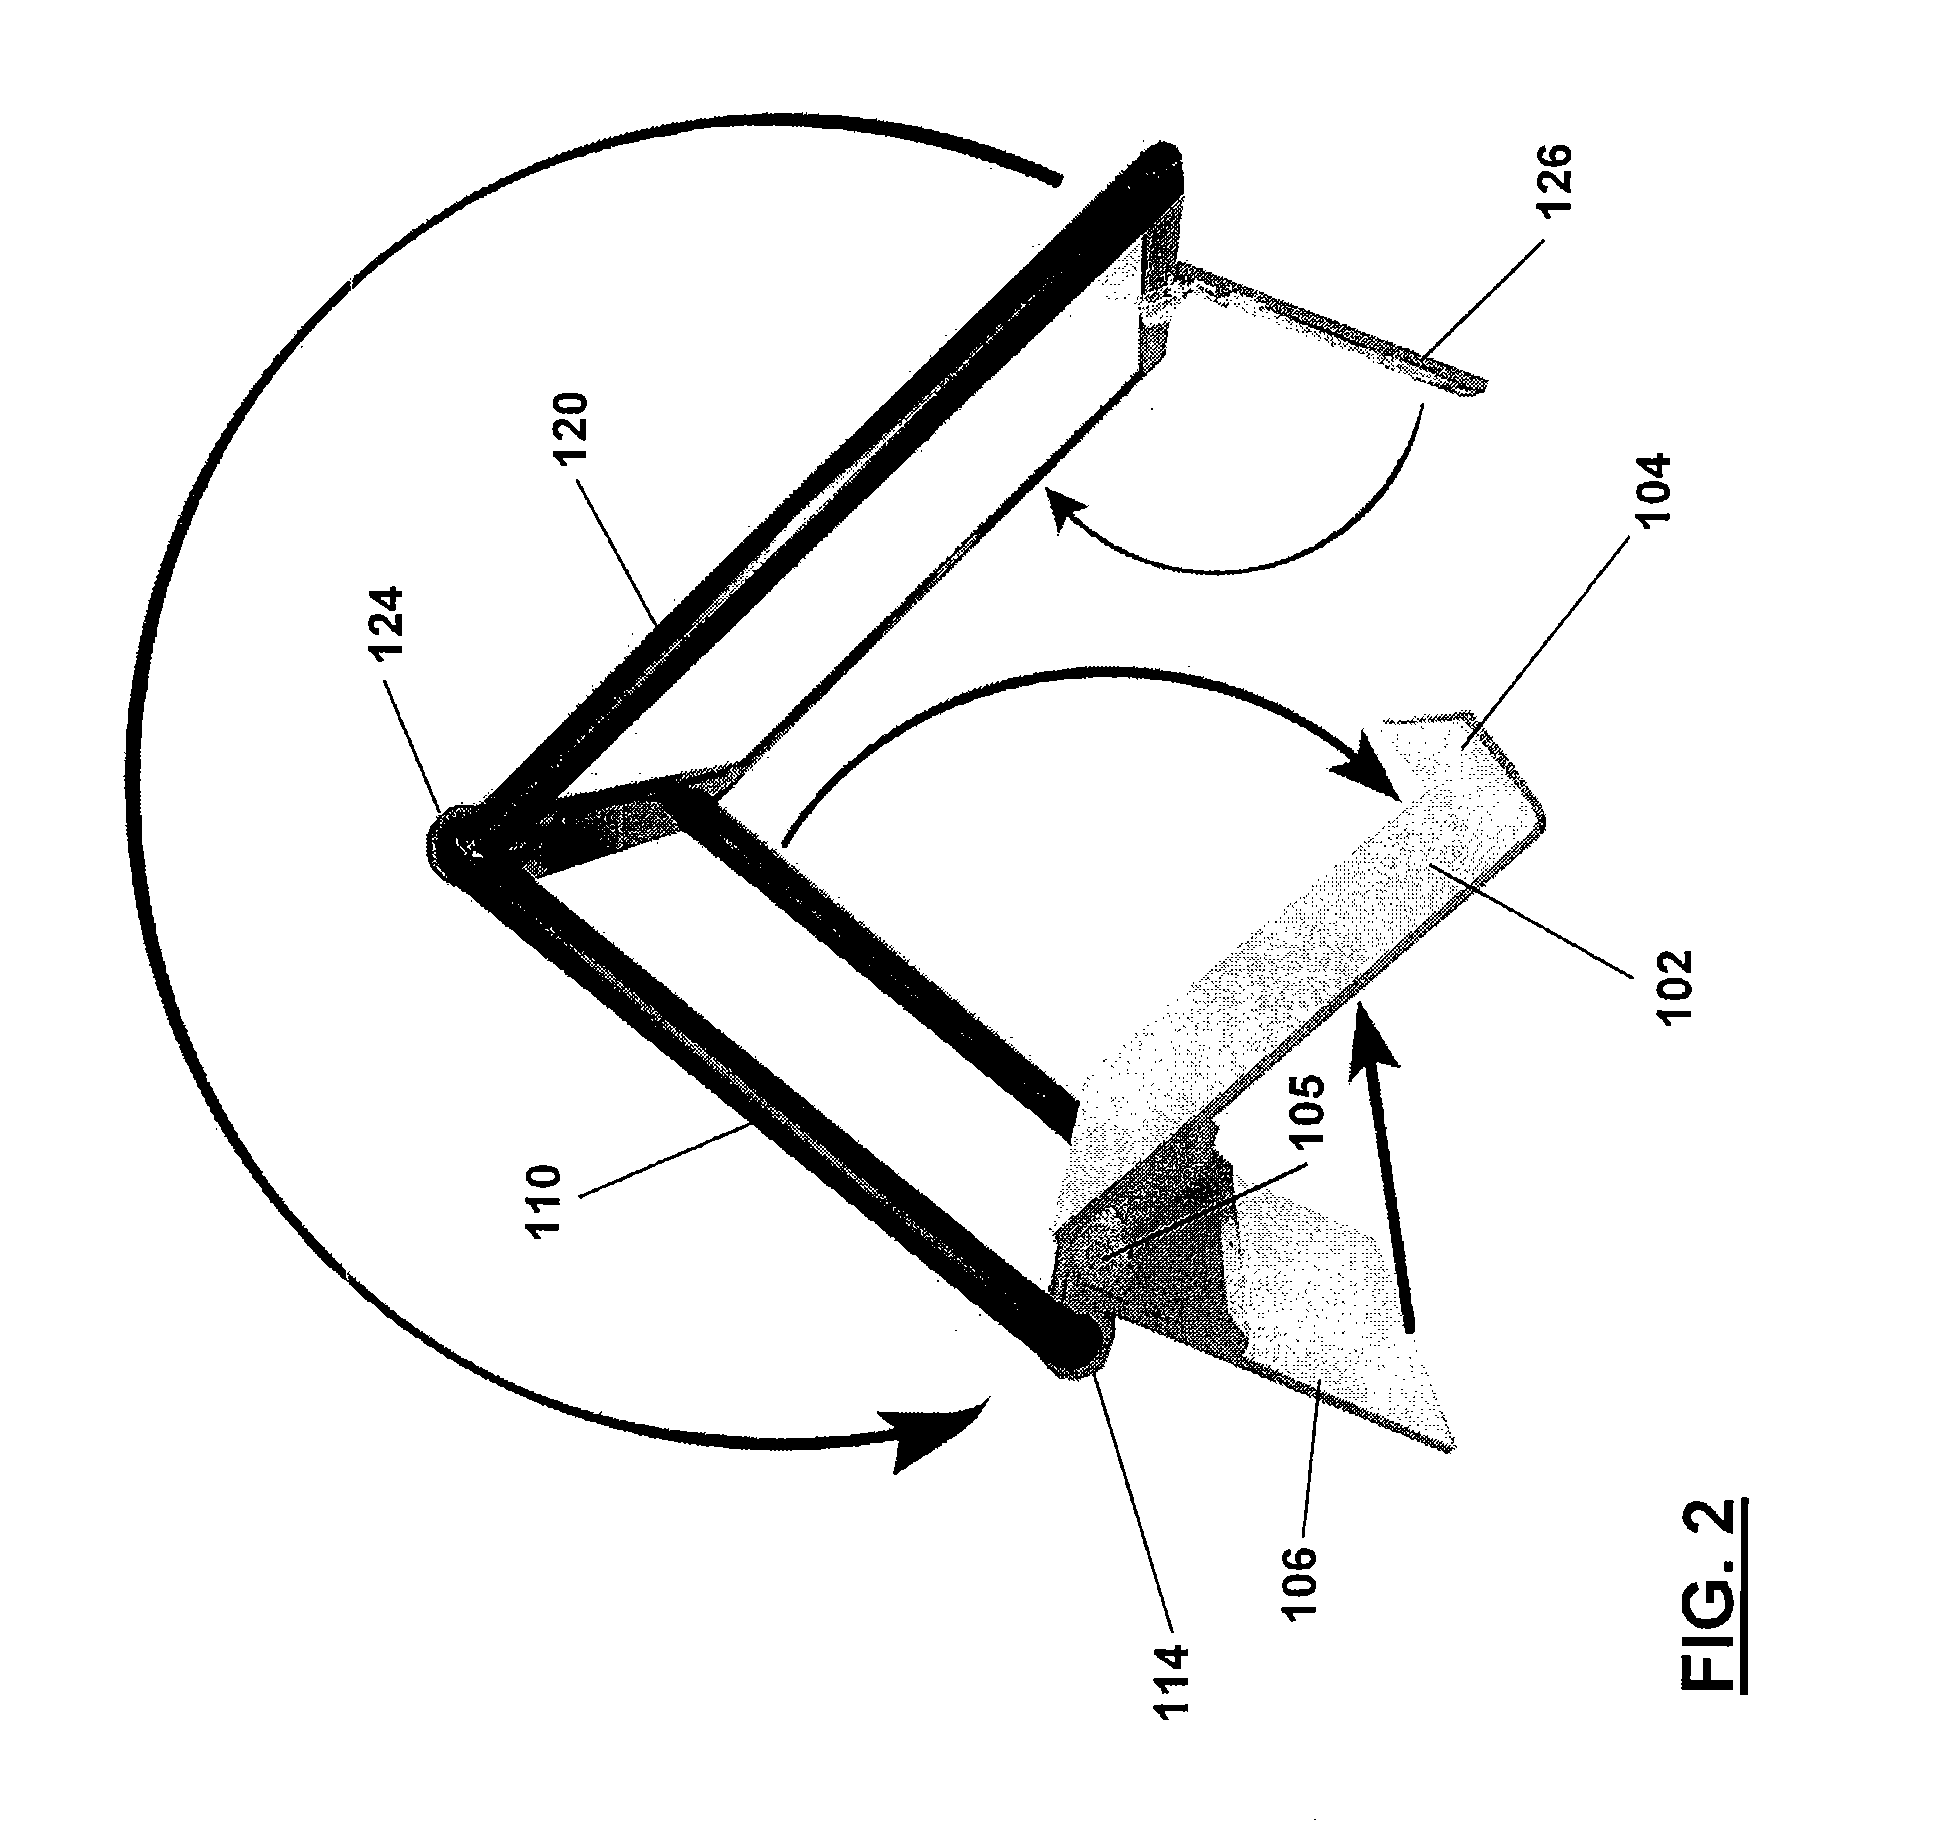 Optical viewer for compact displays